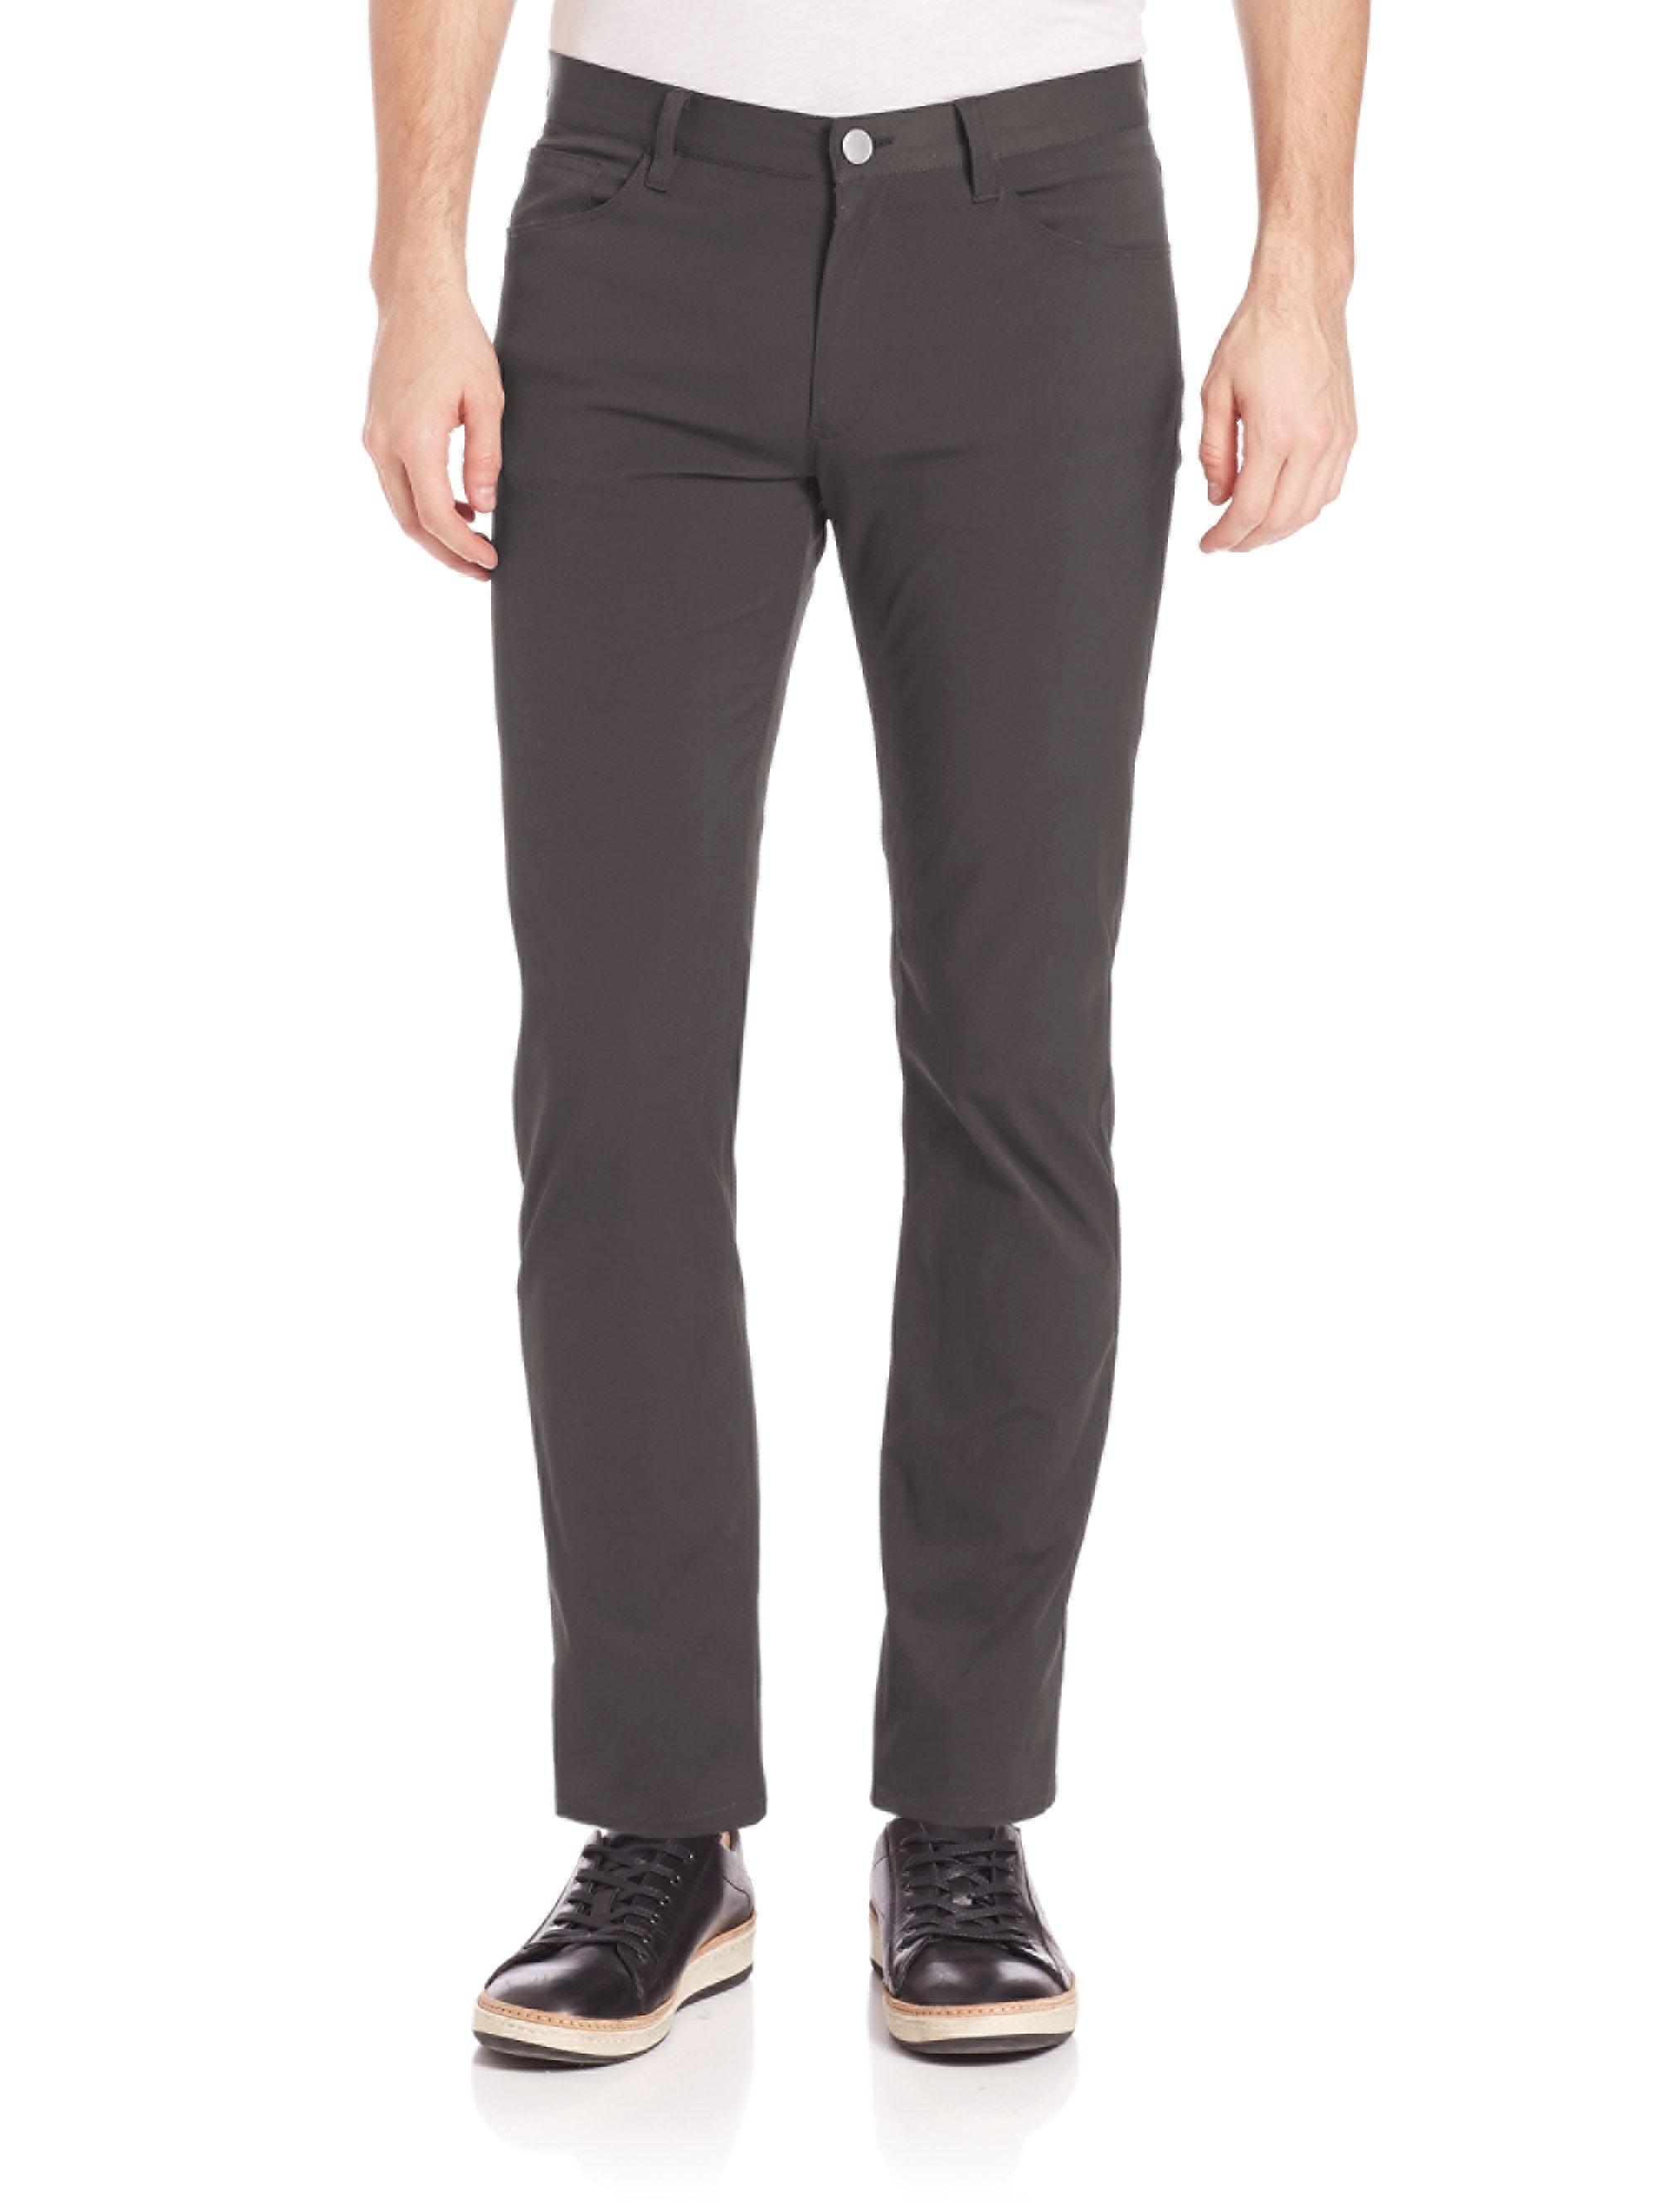 Lyst - Theory Raffi Neoteric Five-pocket Pants in Gray for Men